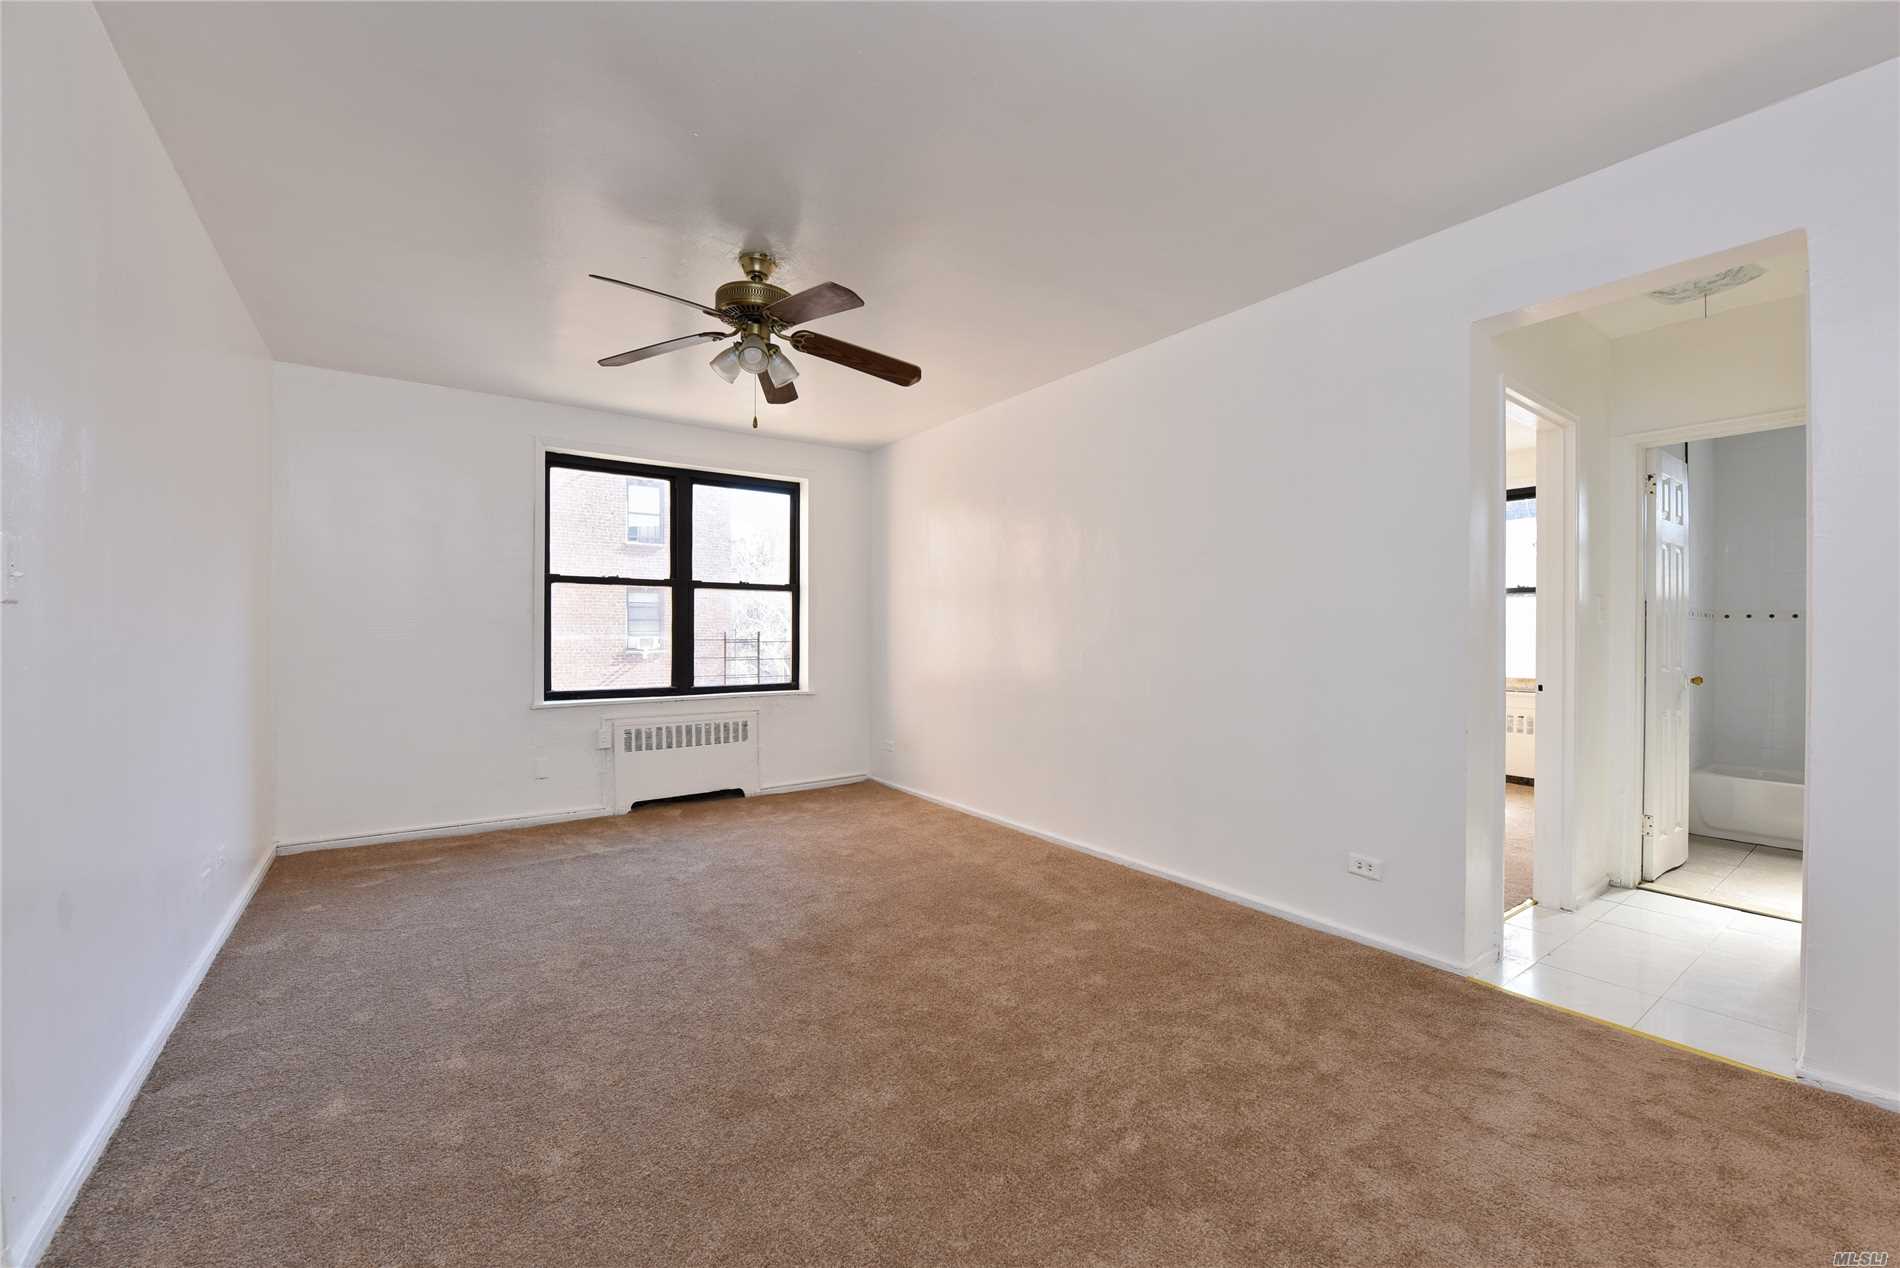 Bright 1Br Coop Unit, Rentable After 2 Years, No Flip Tax, Updated Kitchen And Bathroom, Lot Closets, New Carpets, Laundry Room And Recreation Room Are Available. Sale May Be Subject To Term And Conditions Of An Offering Plan, 2 Blocks To E, M, R Train, 1 Block To Bus Stop, Walk To Broadway, Close To Park, Post Office, School, Supermarket, Etc. All Information Deemed Accurate However Should Be Independently Verified.